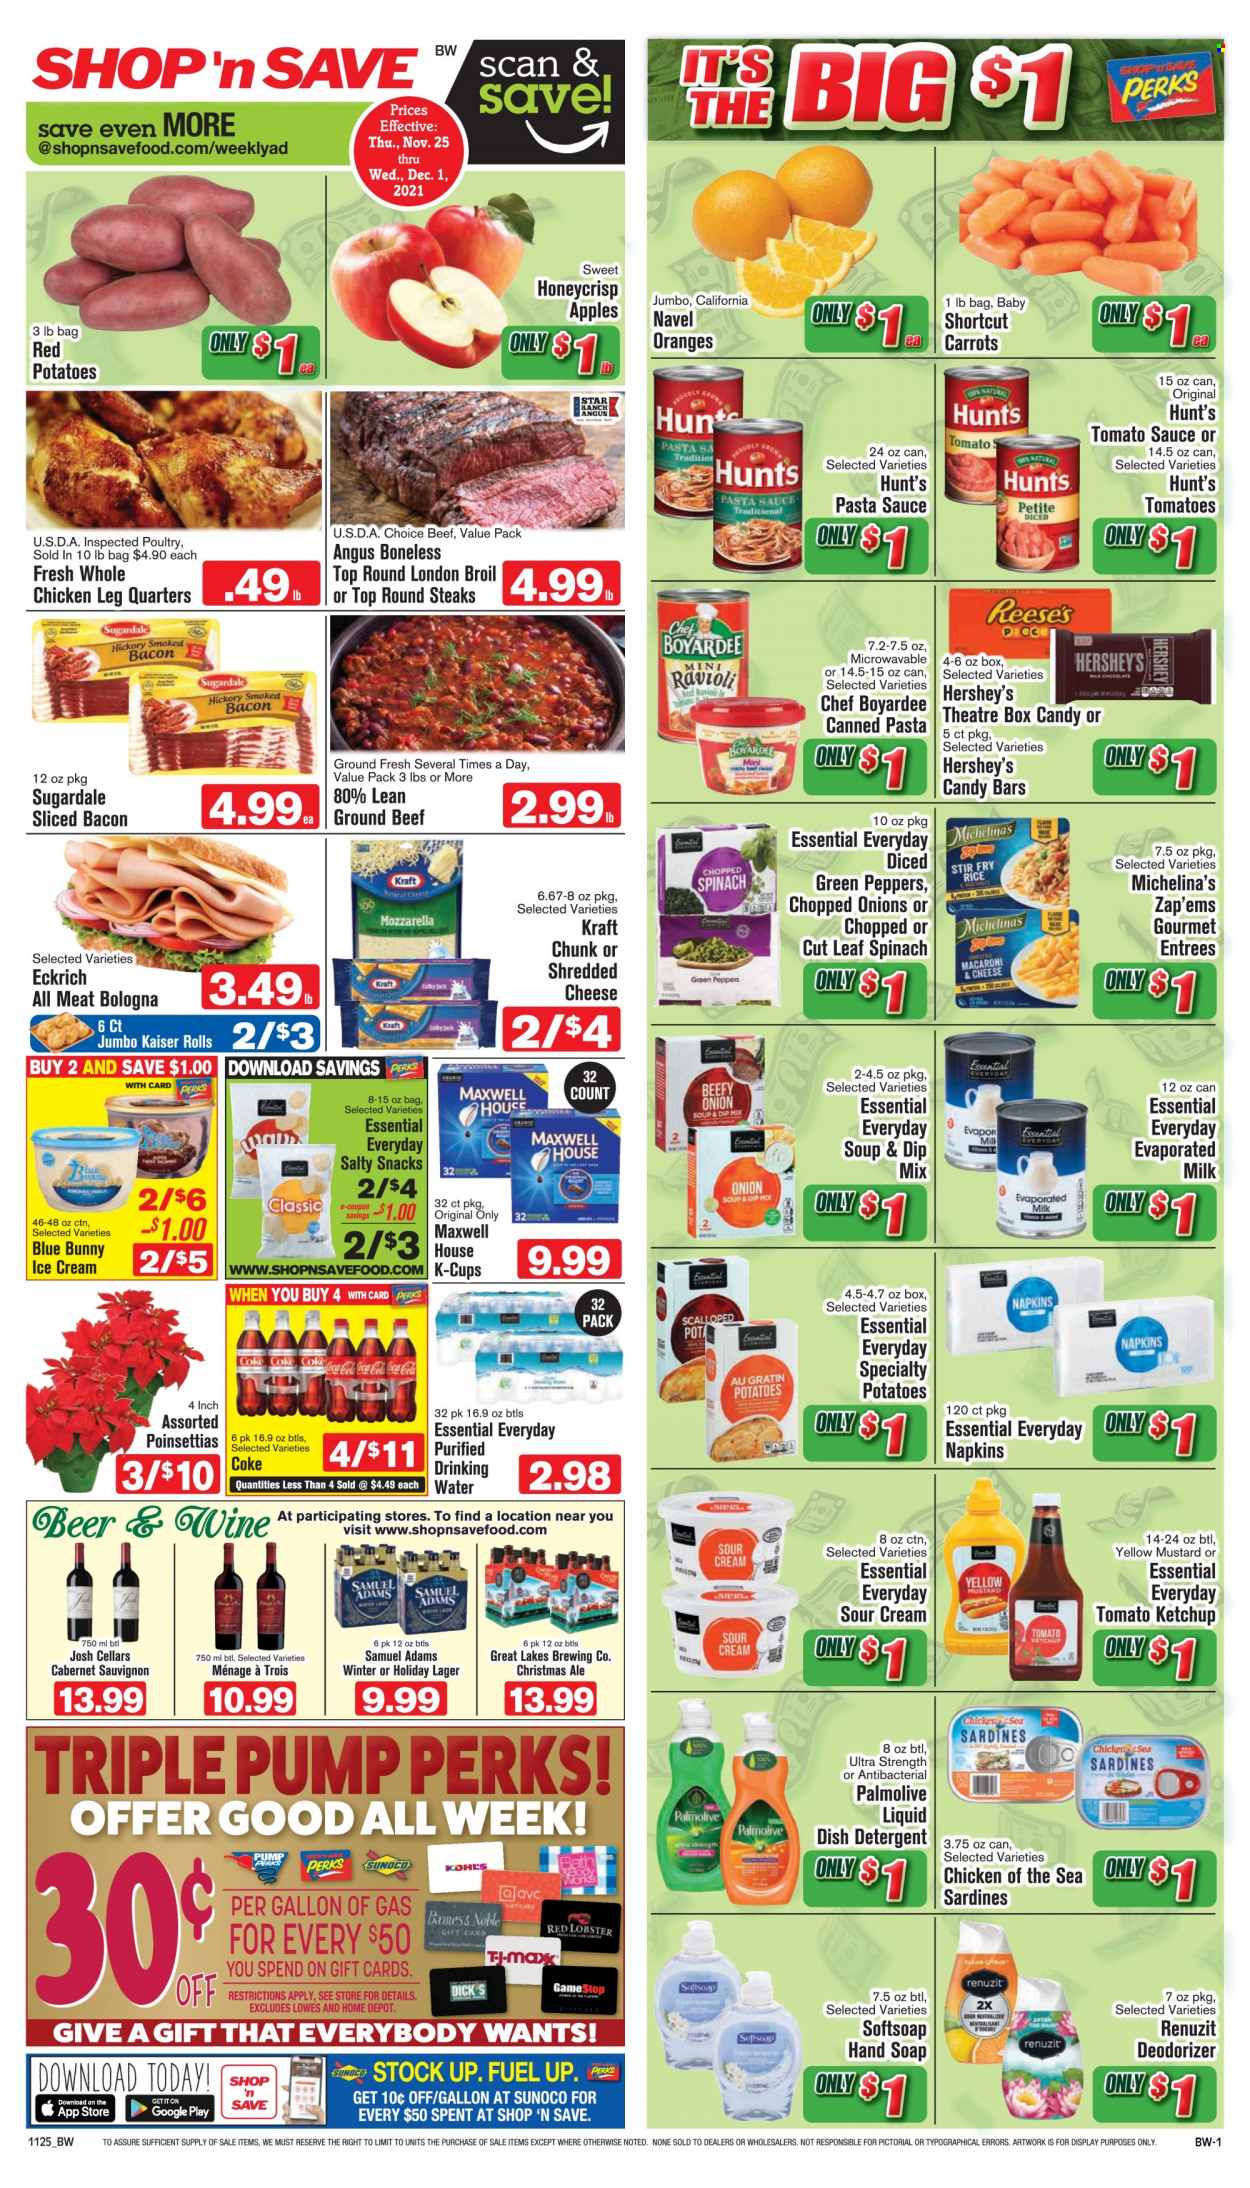 thumbnail - Shop ‘n Save Flyer - 11/25/2021 - 12/01/2021 - Sales products - carrots, tomatoes, potatoes, red potatoes, apples, oranges, chicken legs, beef meat, ground beef, steak, lobster, sardines, macaroni & cheese, ravioli, pasta sauce, soup, Kraft®, Sugardale, bacon, mozzarella, shredded cheese, evaporated milk, sour cream, dip, ice cream, Reese's, Hershey's, Blue Bunny, snack, tomato sauce, Chicken of the Sea, Chef Boyardee, rice, mustard, ketchup, Coca-Cola, Maxwell House, coffee capsules, K-Cups, Cabernet Sauvignon, beer, Lager, napkins, detergent, Softsoap, hand soap, Palmolive, soap. Page 1.